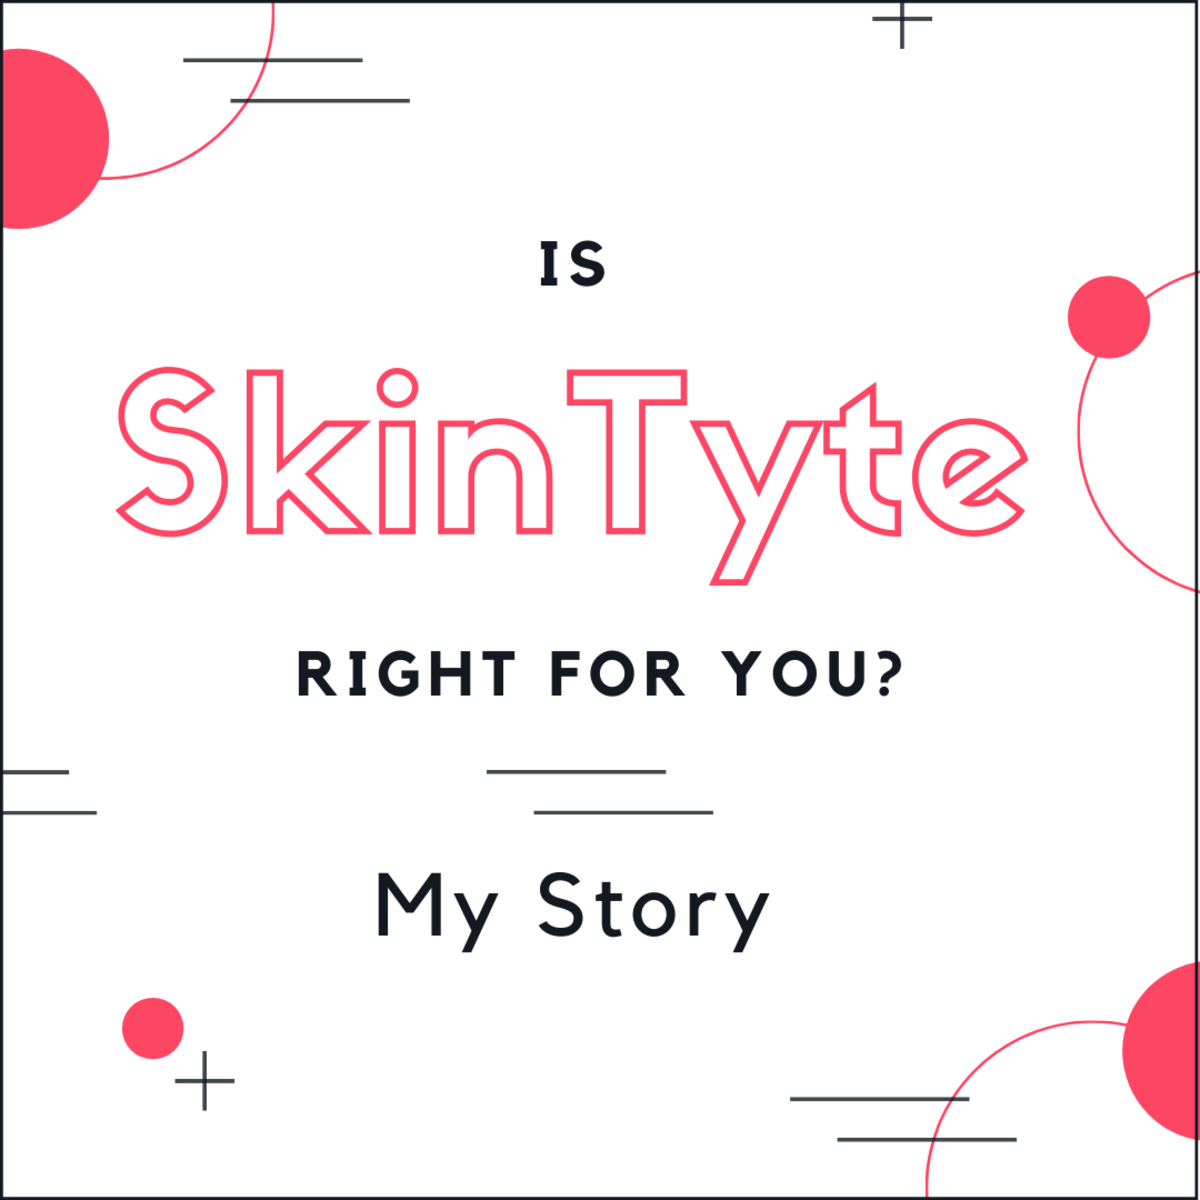 A Review of SkinTyte Laser for the Face and Neck